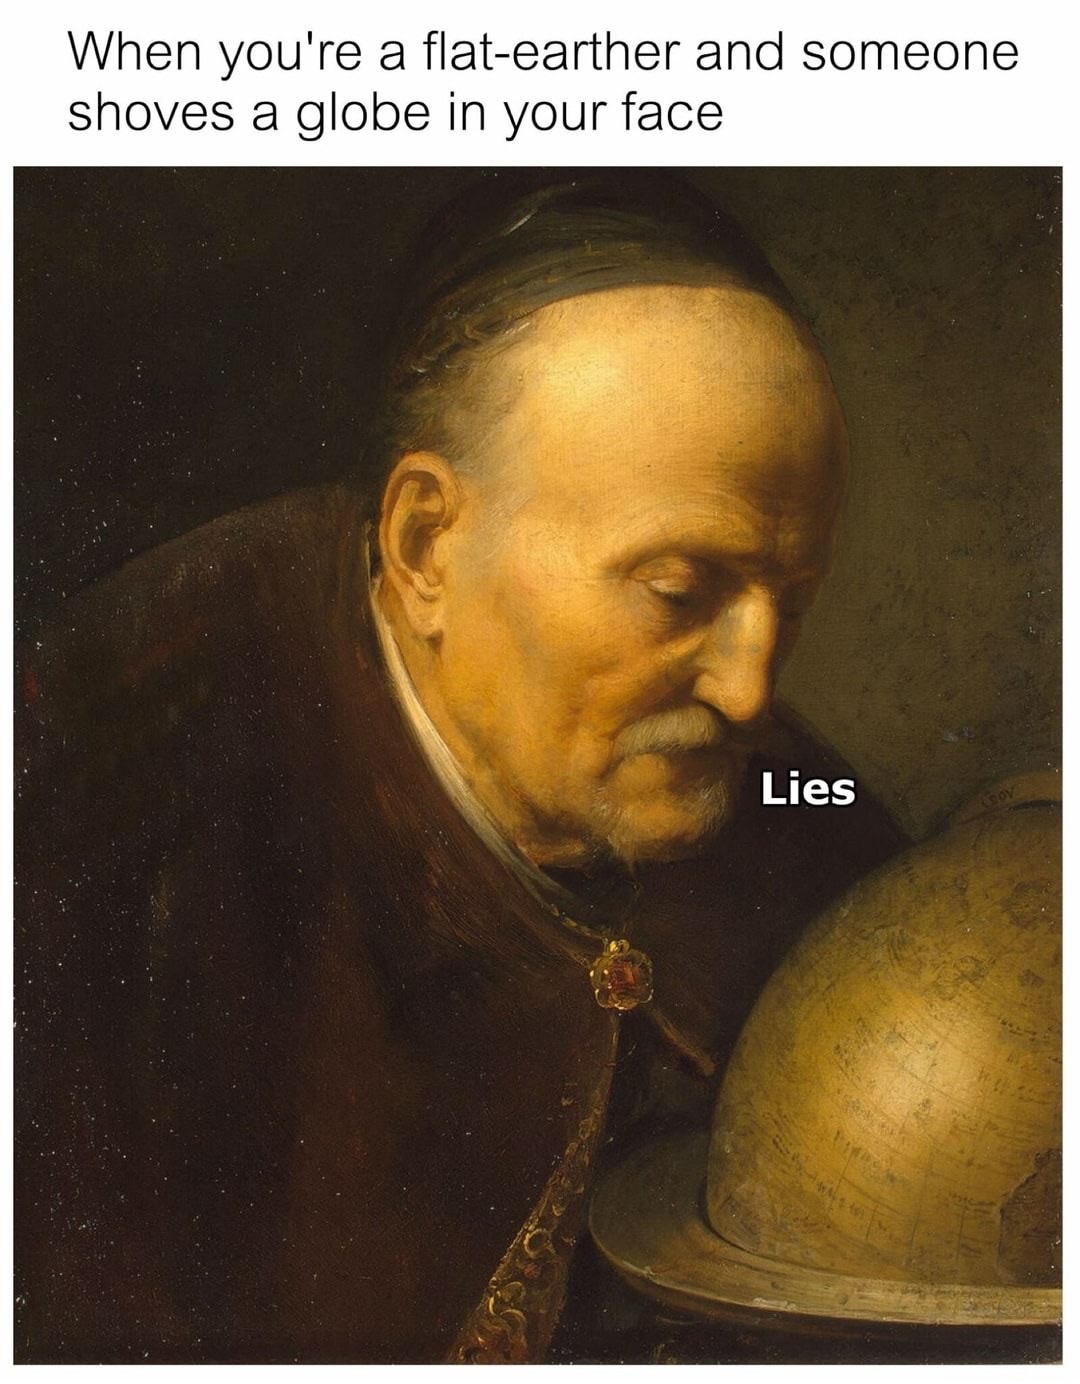 flat earth lies meme - When you're a flatearther and someone shoves a globe in your face Lies